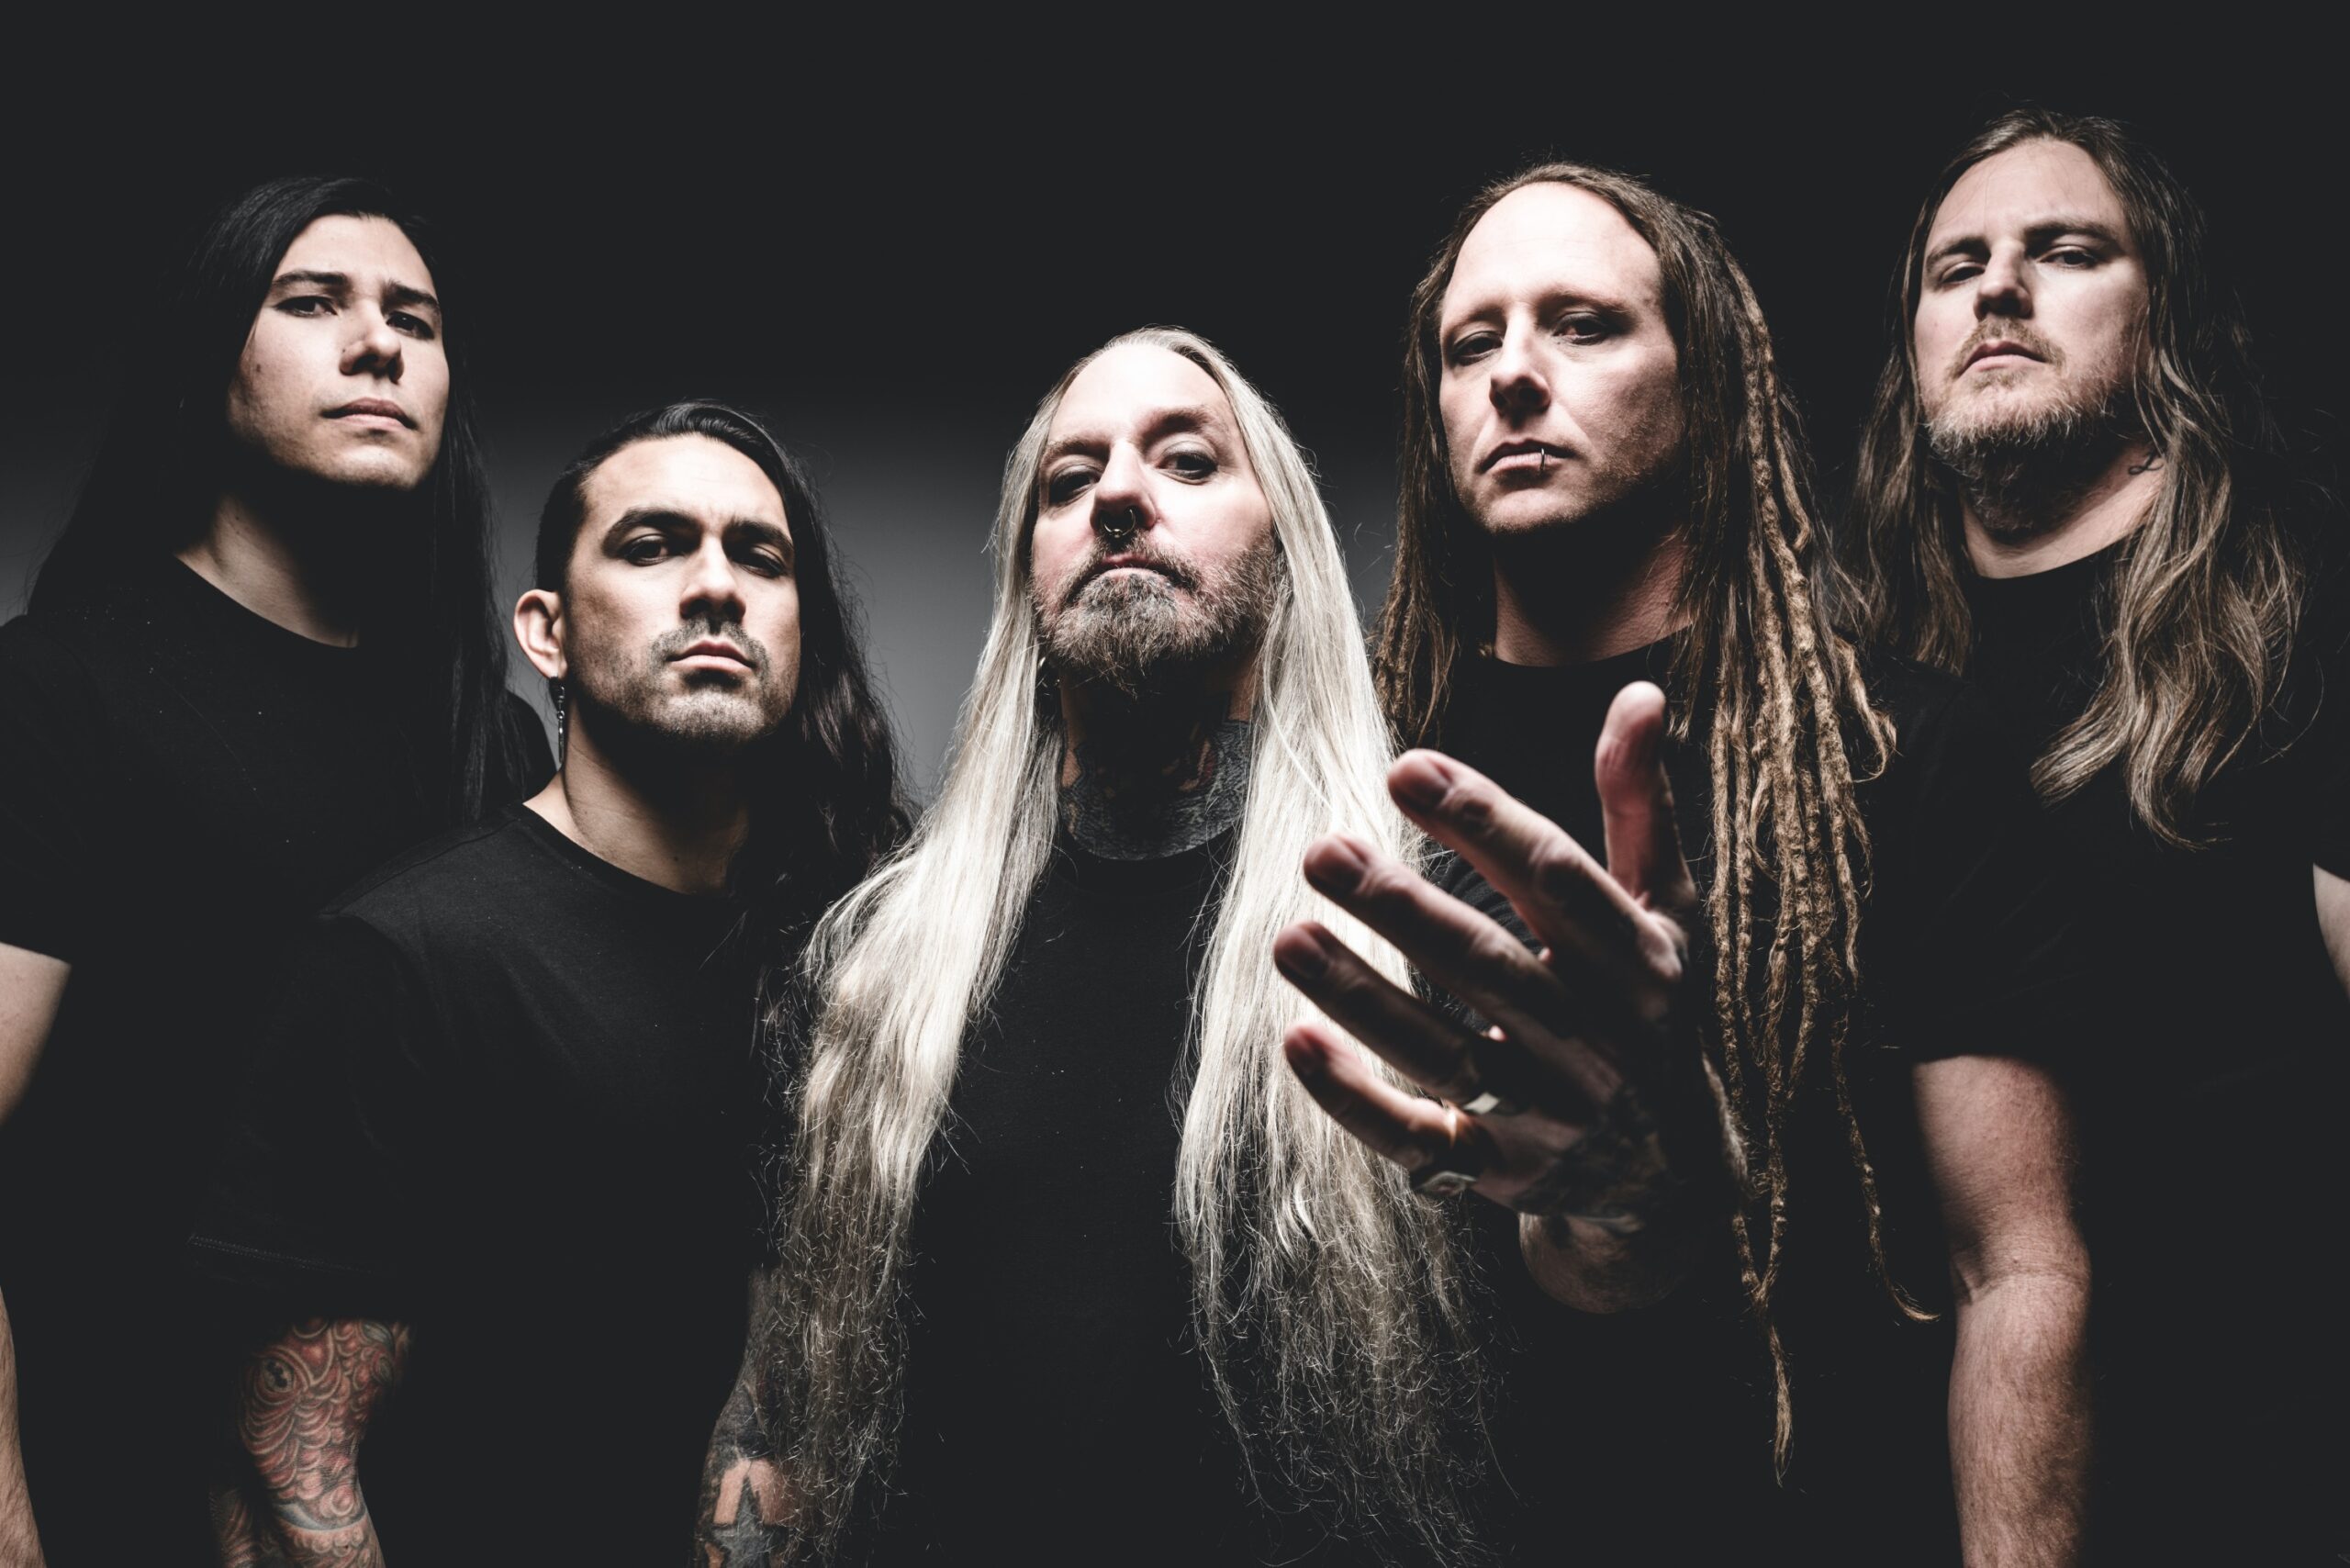 Groove Metal Legends DEVILDRIVER Release Charging New Track, “If Blood is Life” + Music Video